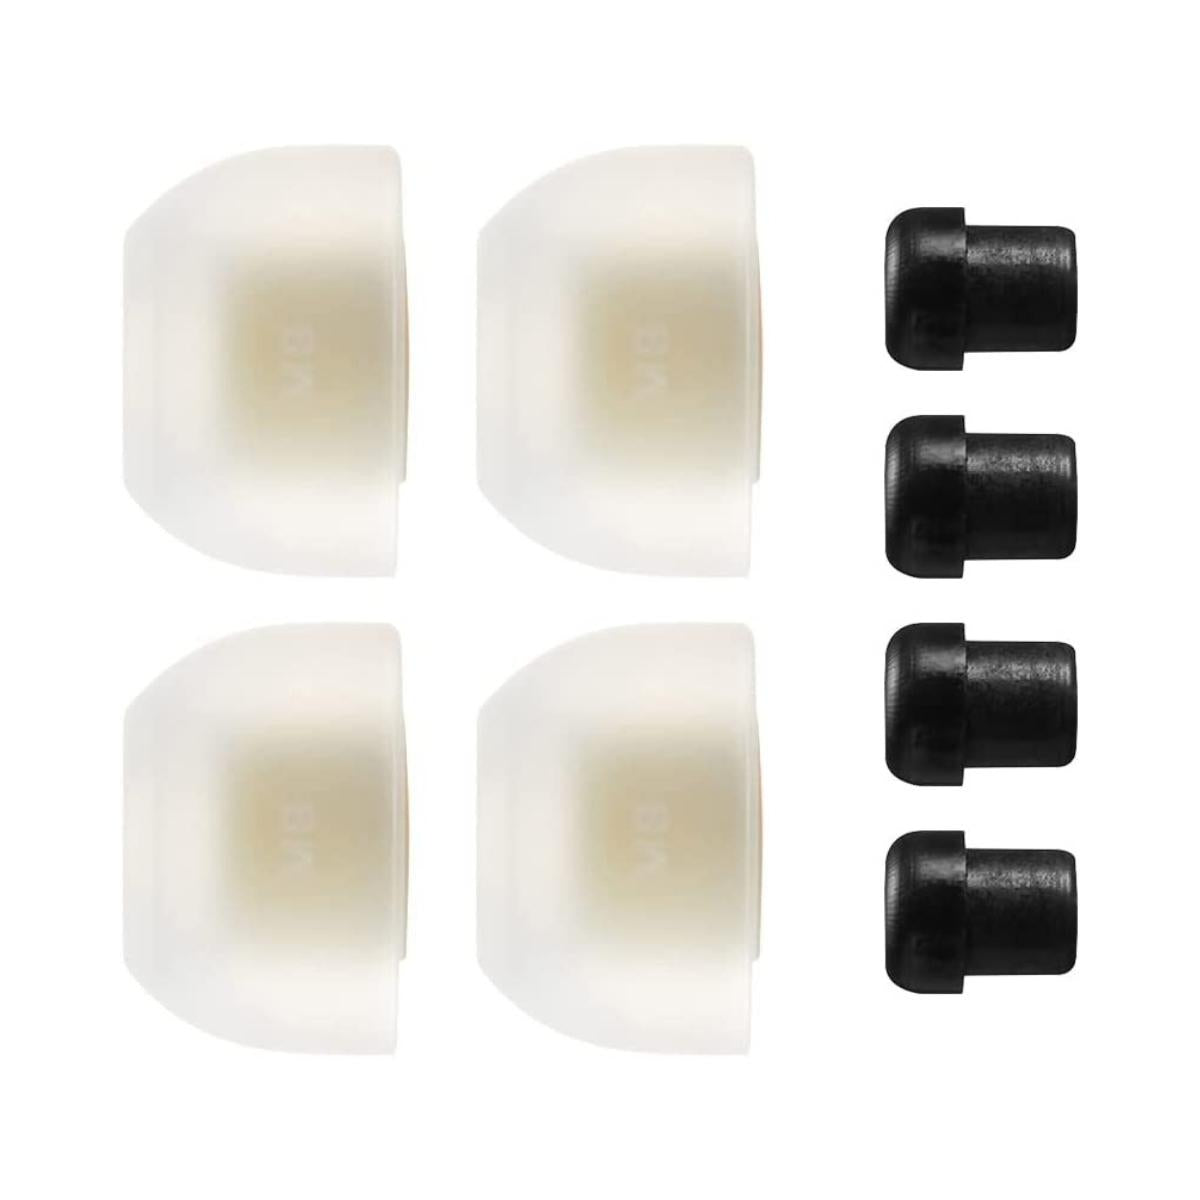 AZLA SednaEarfit MAX Eartips For IEMs